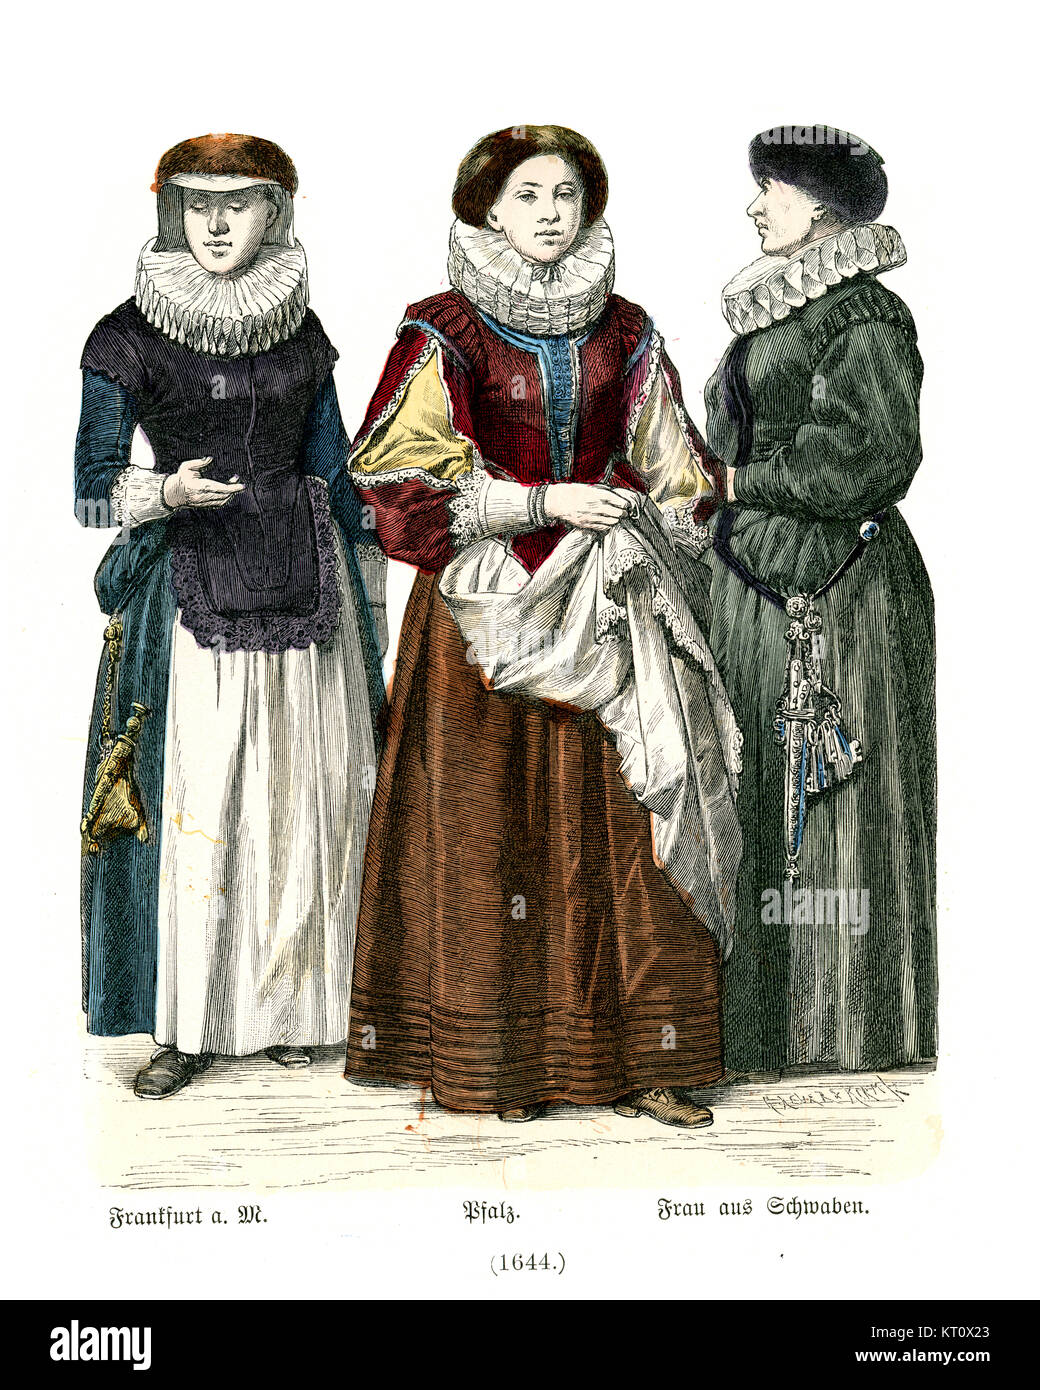 Vintage engraving of Womens fashions in Germany, 17th Century. Frankfurt, Pfalz and Schwaben Stock Photo